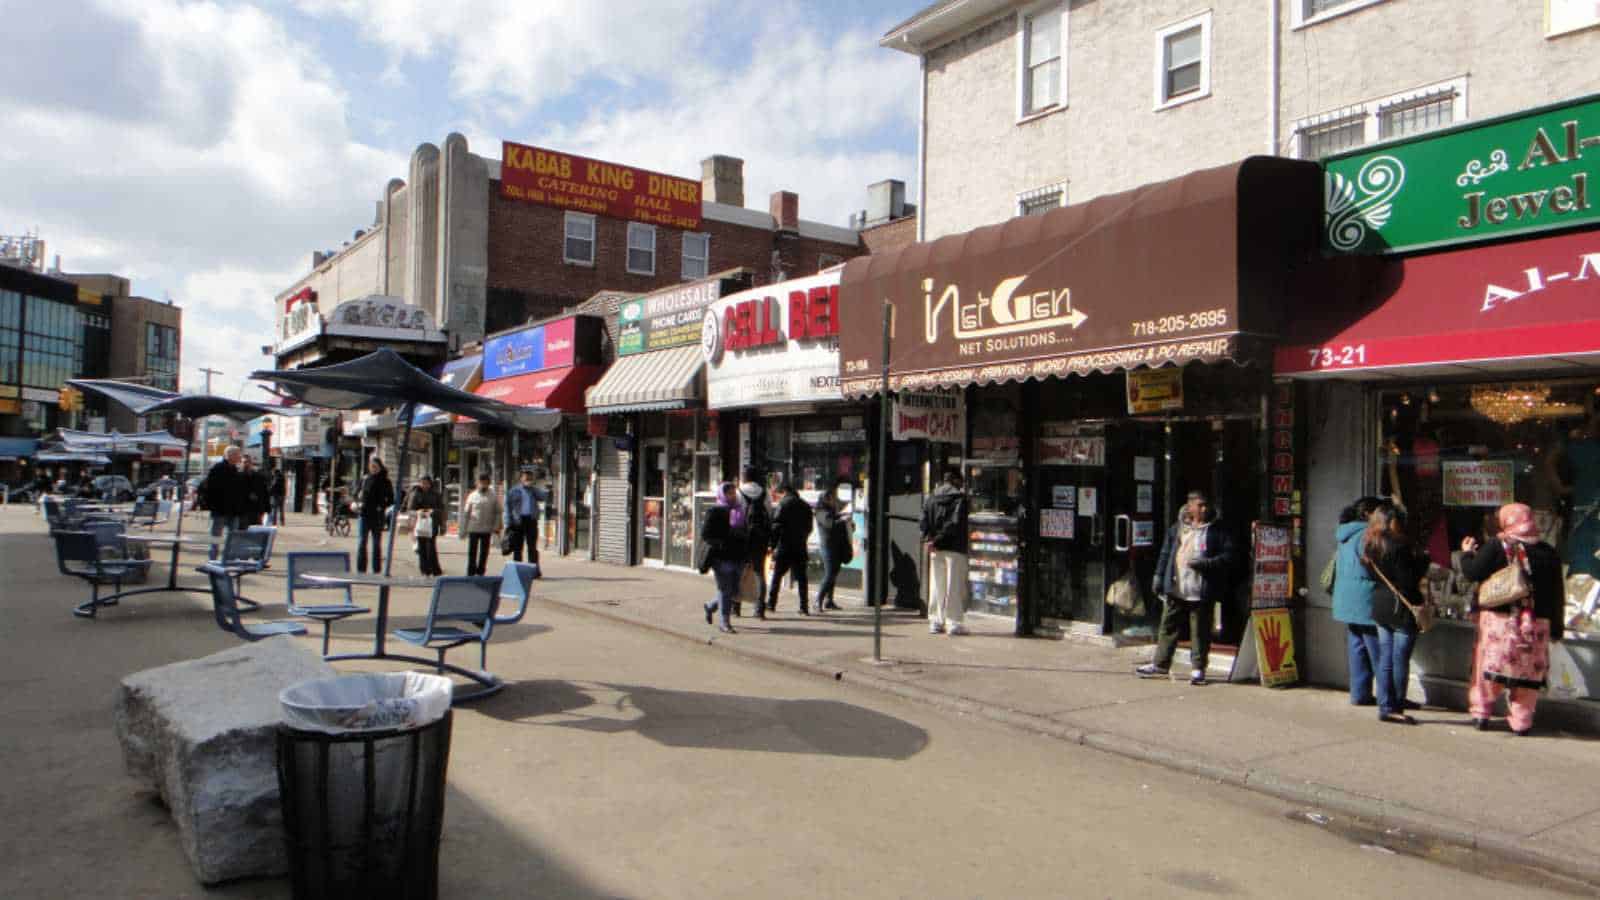 Queens, NY - March 10 2012: Diversity Plaza, a pedestrian plaza adjacent to South Asian businesses and restaurants in downtown Jackson Heights